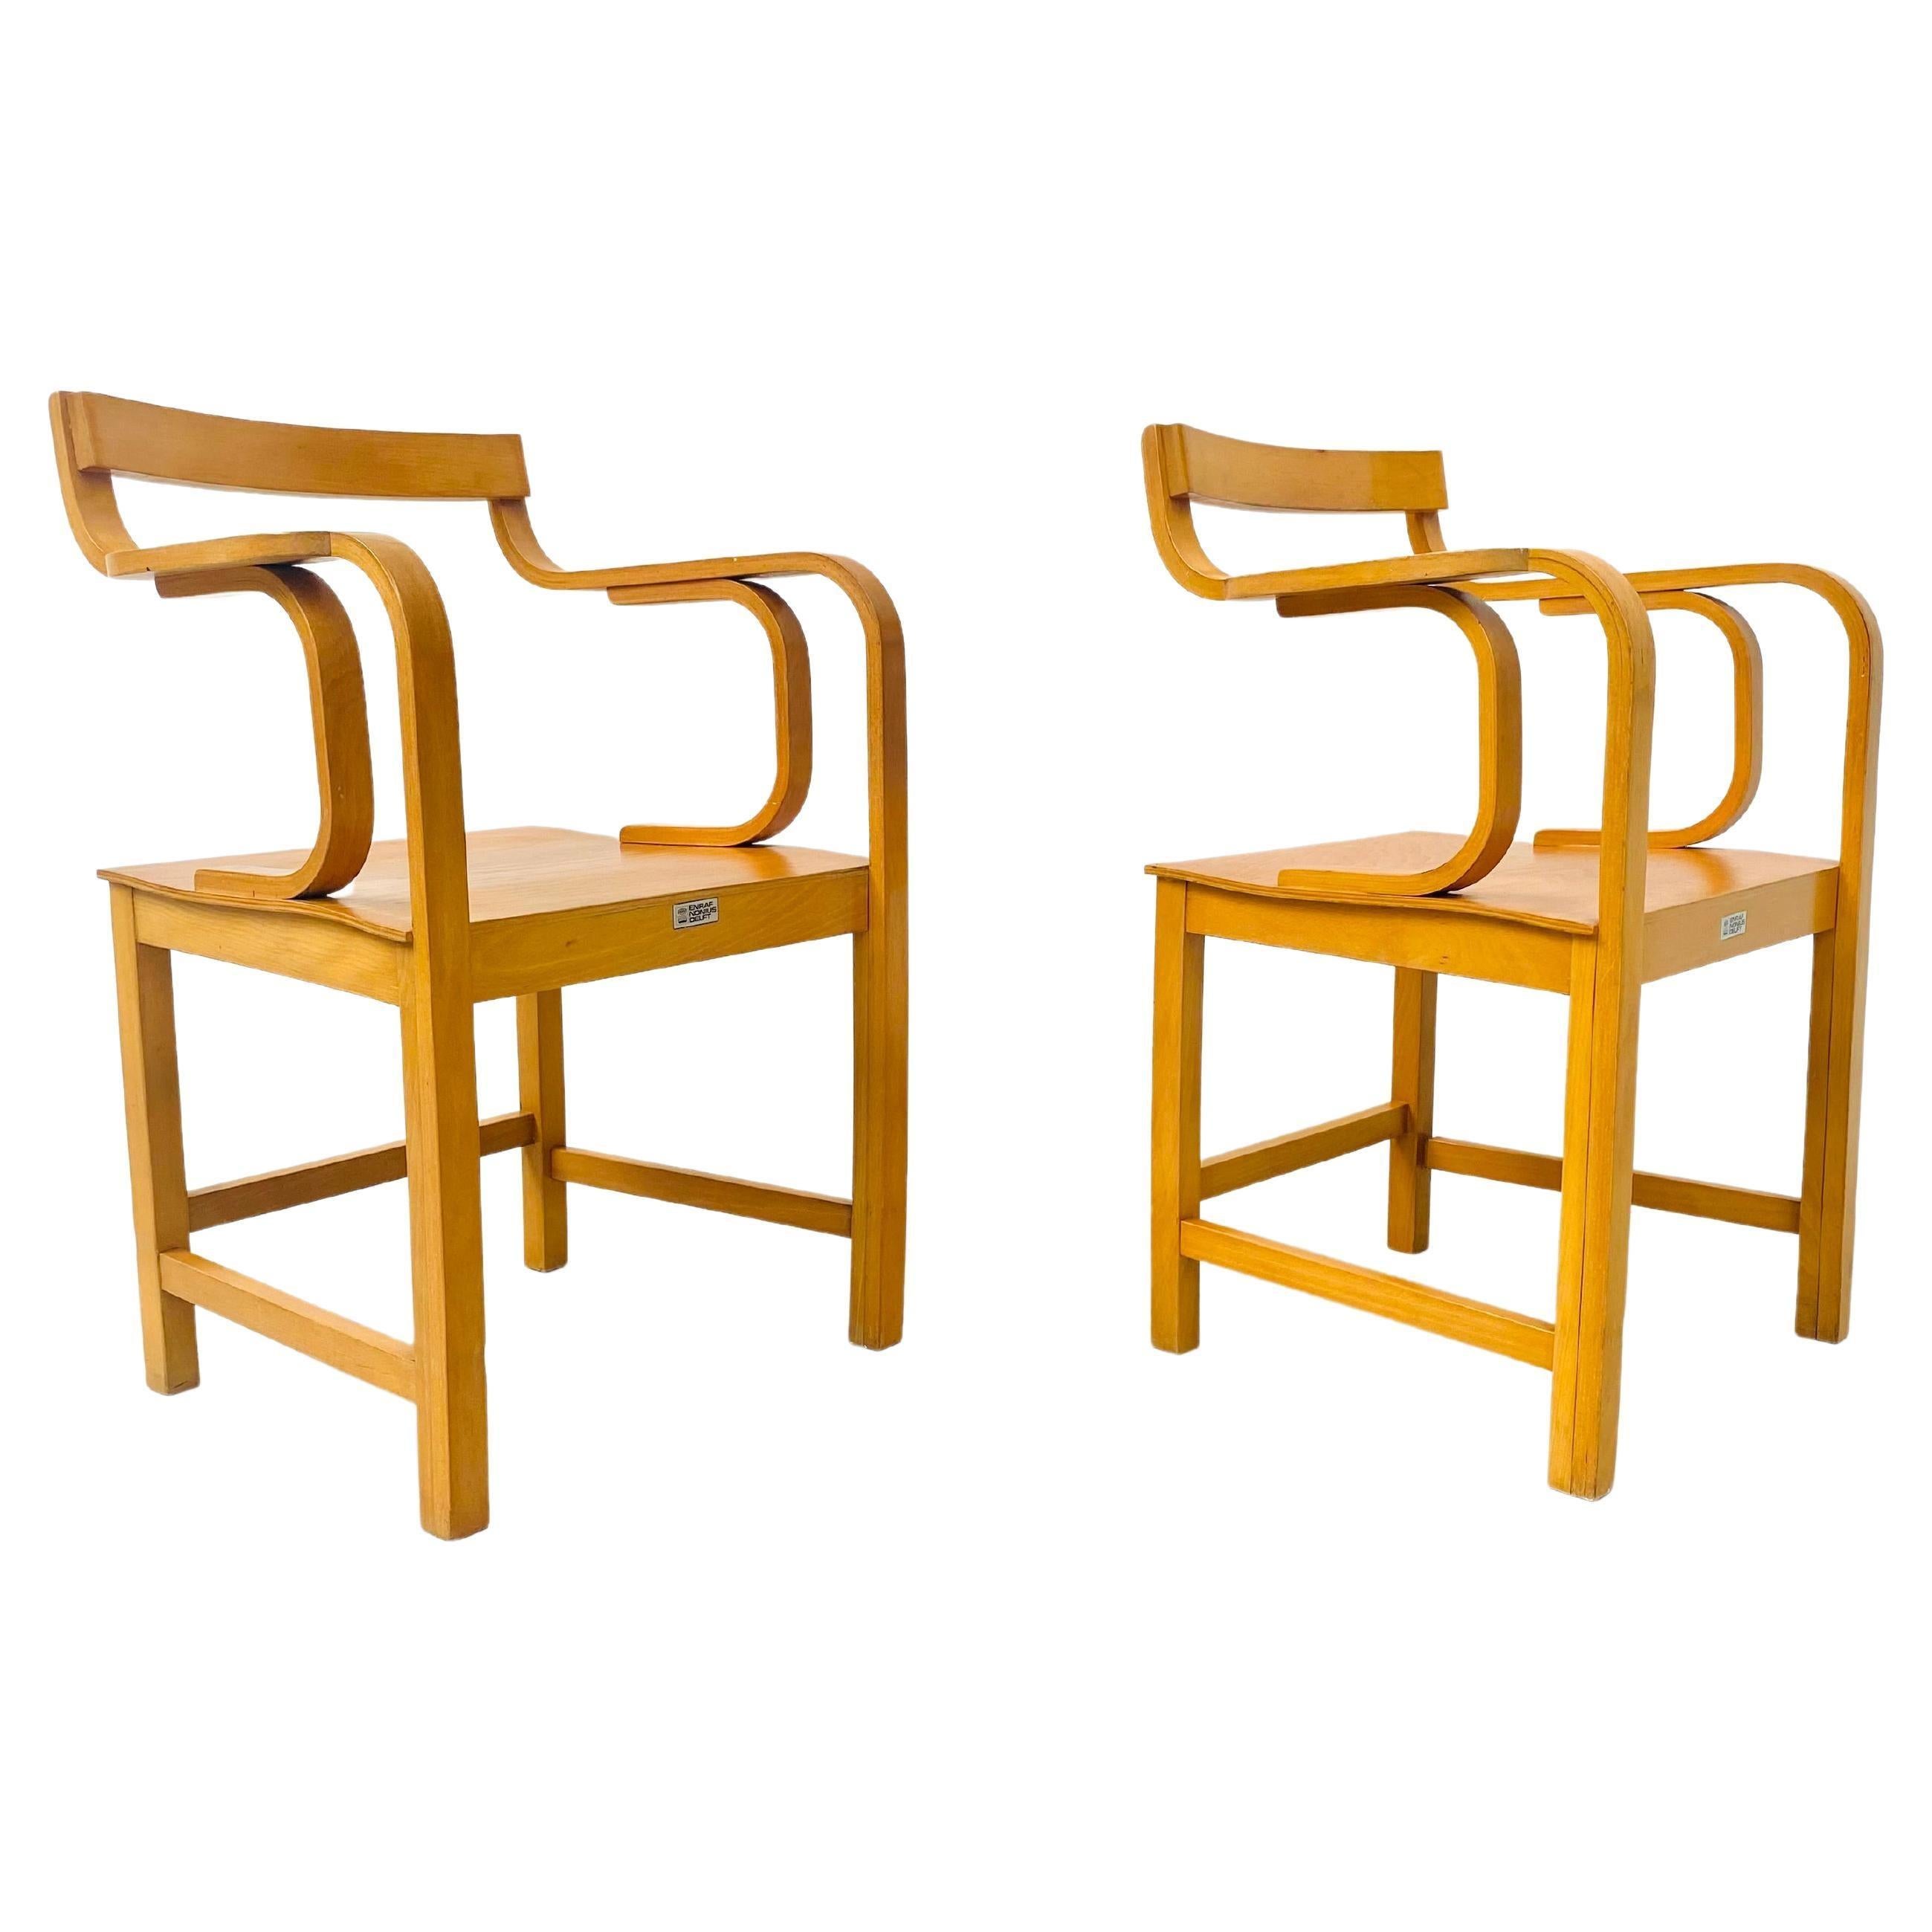 Scandinavian Modern Vintage Dutch Plywood Beech Armchairs by Enraf Nonius Delft, 1970s For Sale